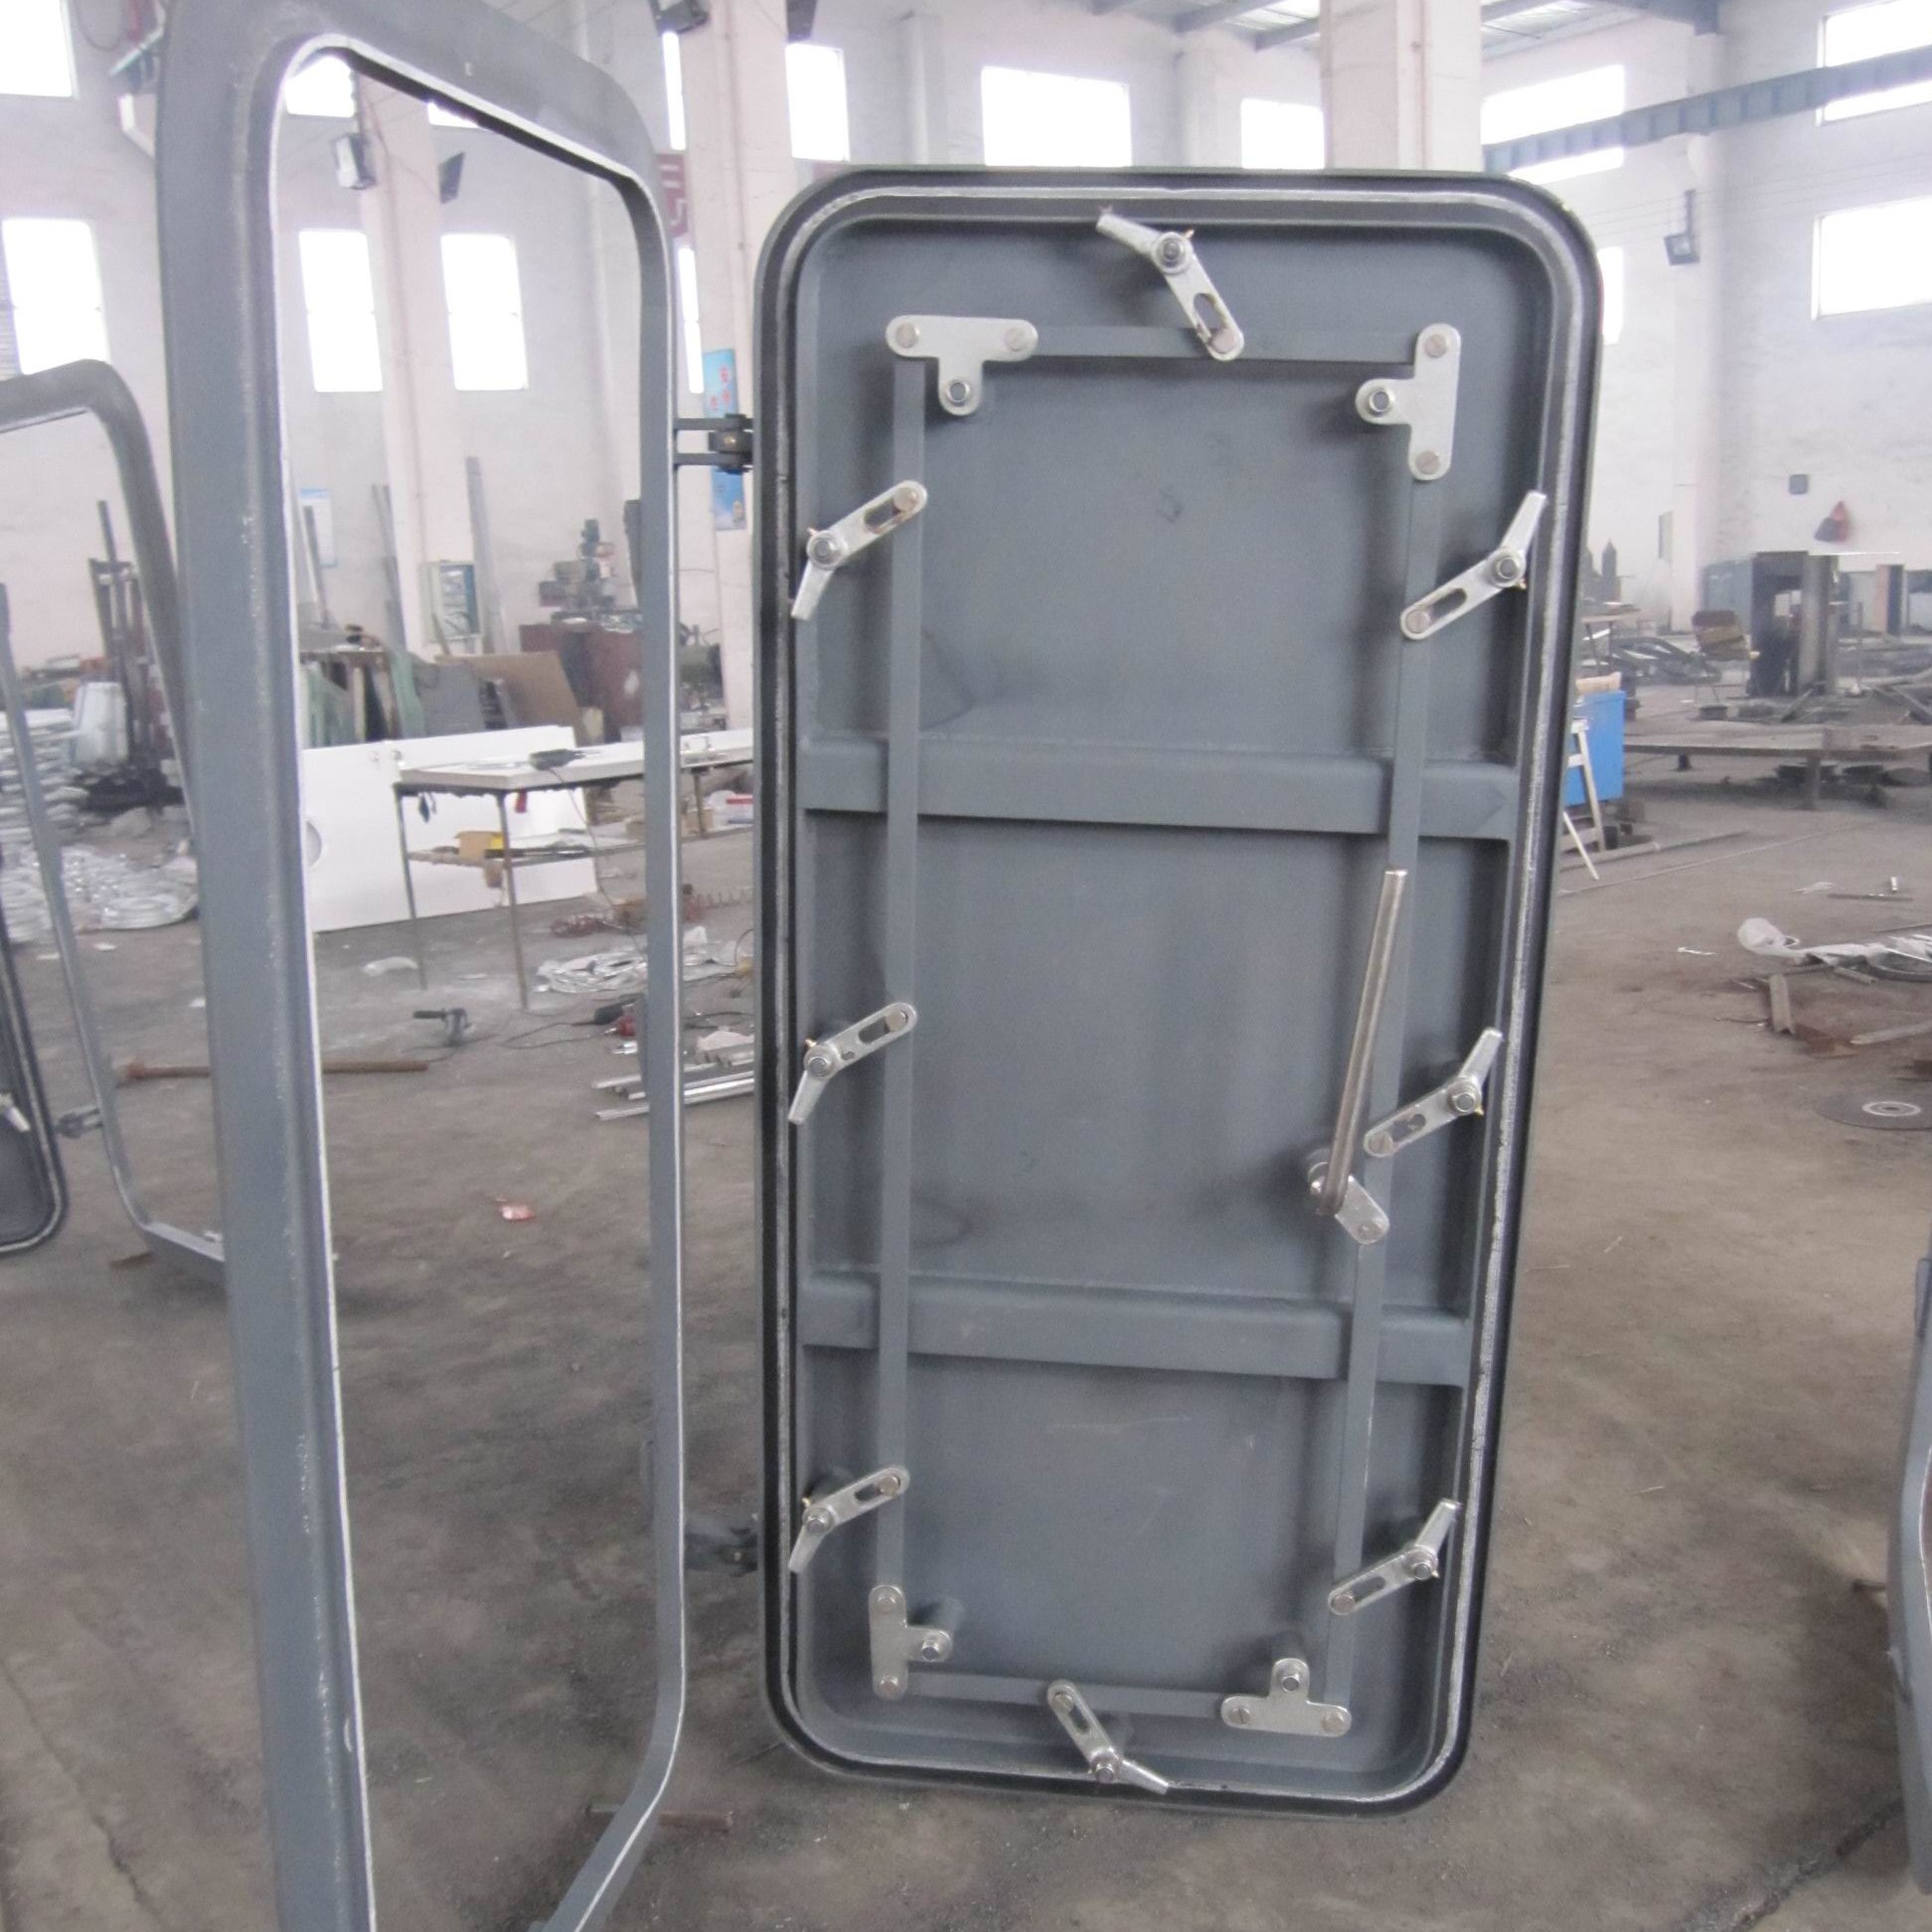 Boat A60 Fire Watertight Entry Door For Ships with door accessory